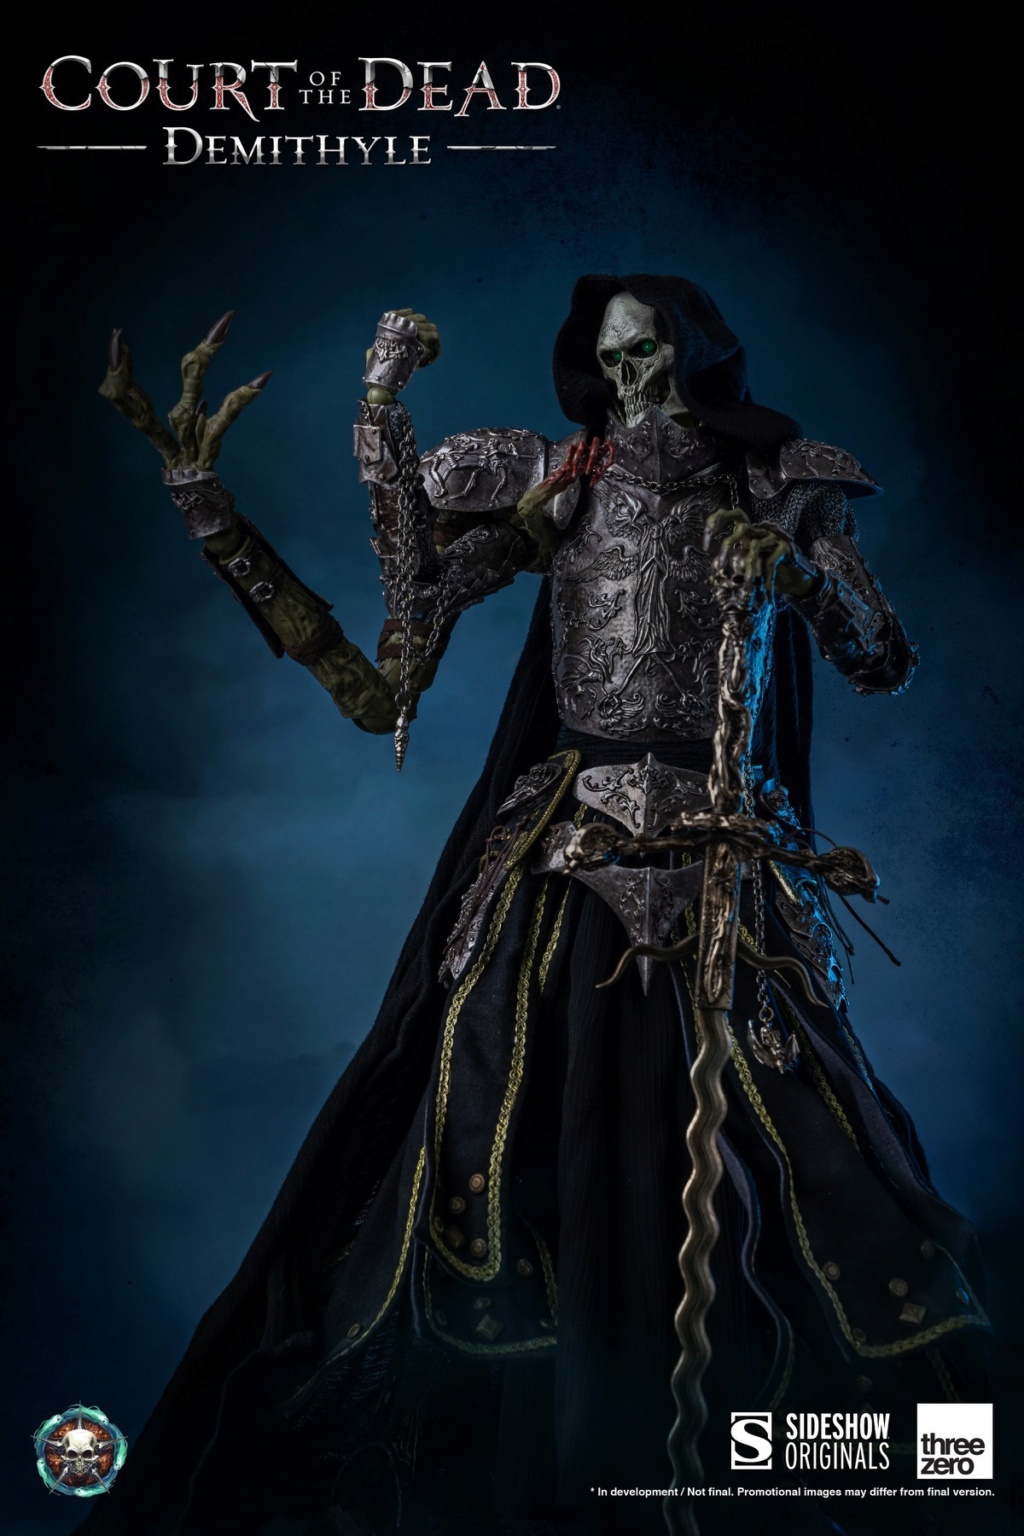 SideshowCollecibles - NEW PRODUCT: Threezero & Sideshow: 1/6 "Court of the Dead" - Demithyle Action Figure 09322010